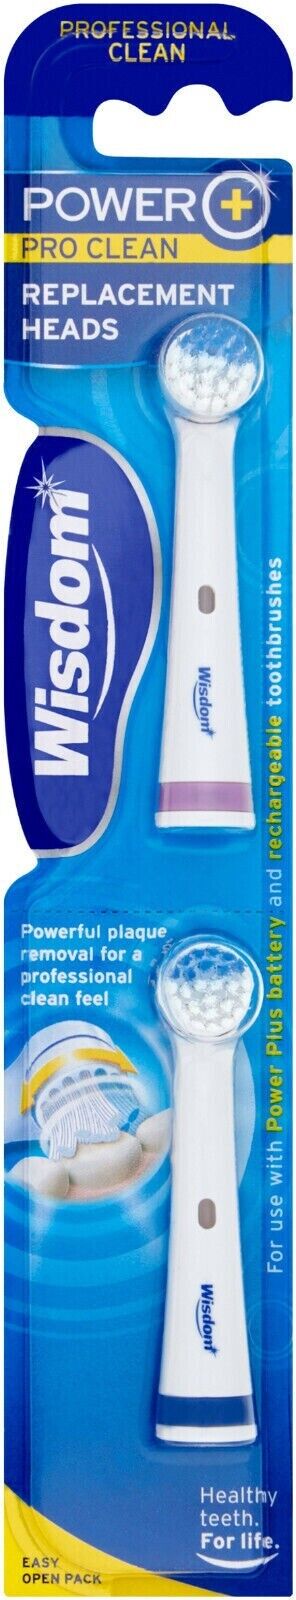 Wisdom Power Plus Electric Toothbrush Replacement Heads; AUTHENTIC & GENUINE